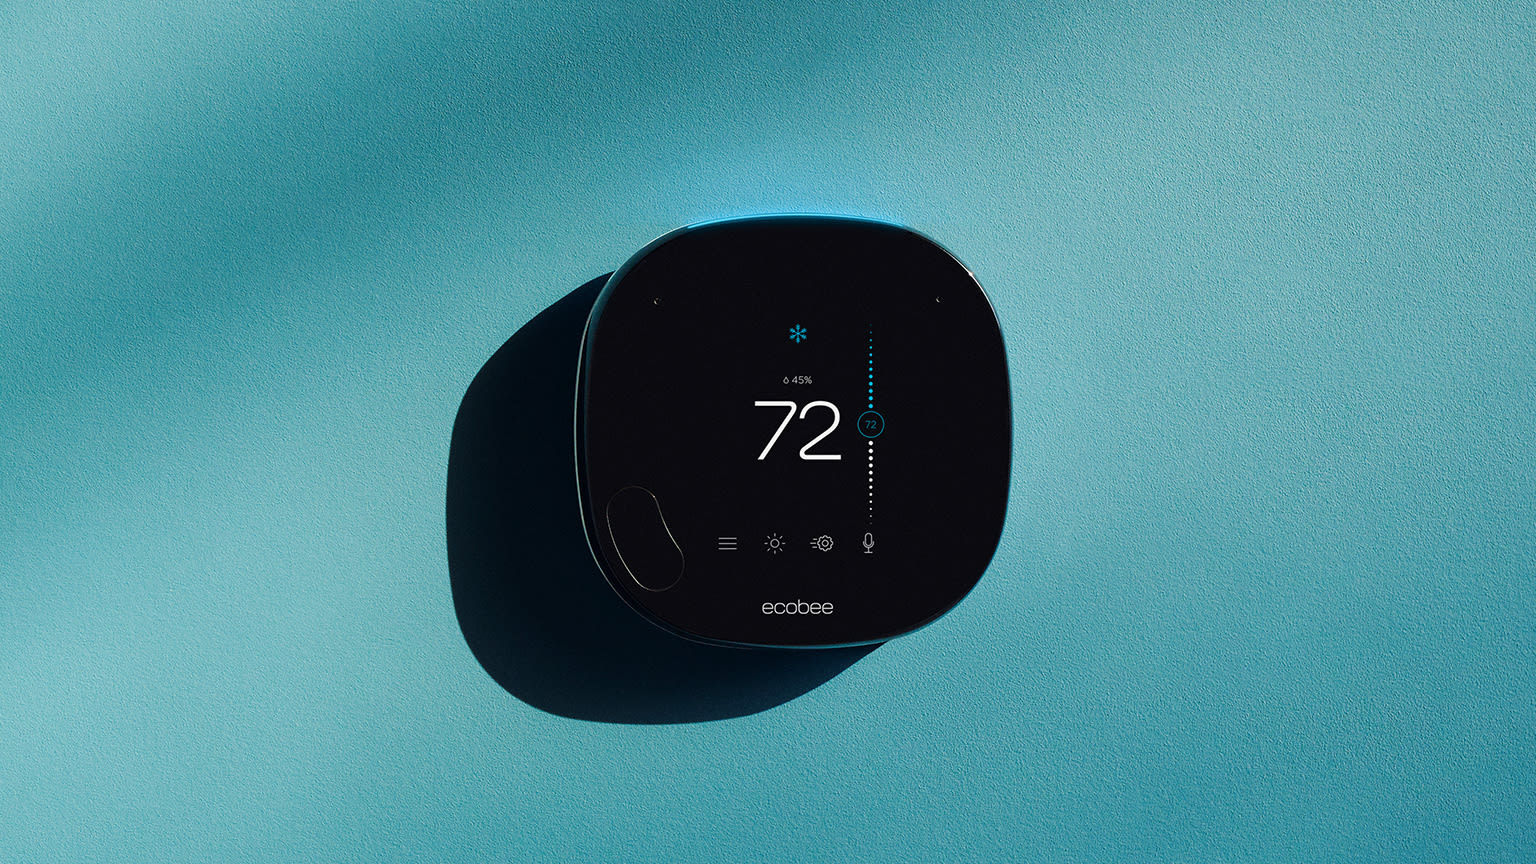 ecobee SmartThermostat with voice control on light blue background